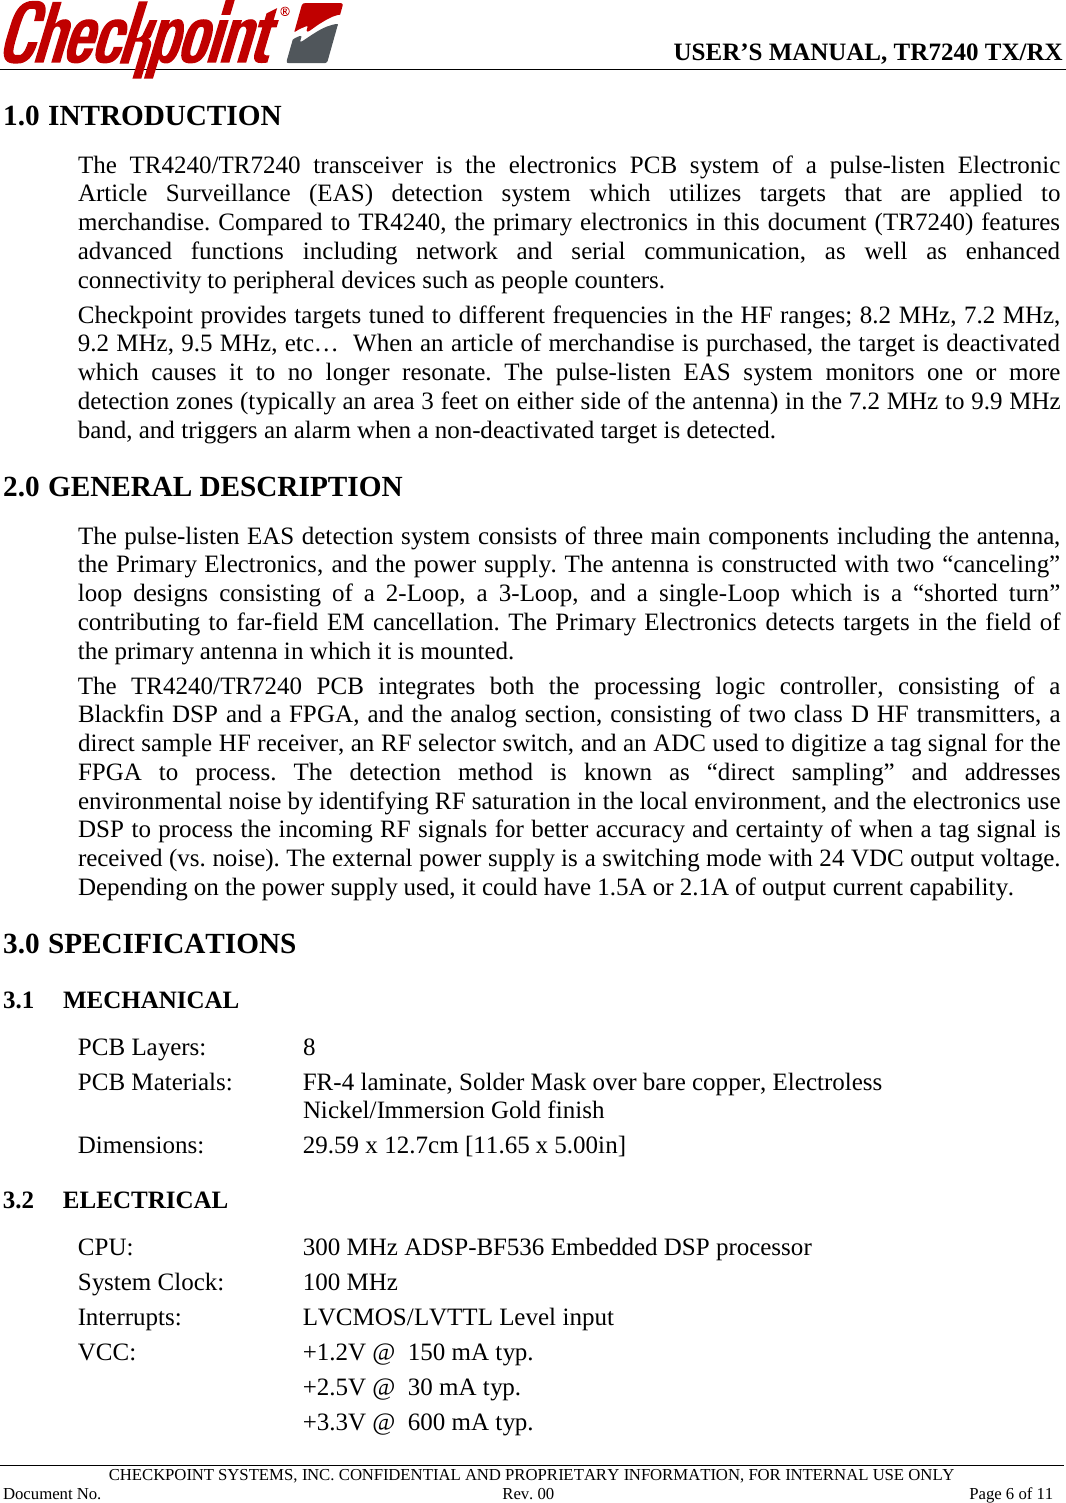      USER’S MANUAL, TR7240 TX/RX   CHECKPOINT SYSTEMS, INC. CONFIDENTIAL AND PROPRIETARY INFORMATION, FOR INTERNAL USE ONLY Document No.     Rev. 00 Page 6 of 11 1.0 INTRODUCTION The  TR4240/TR7240 transceiver is the  electronics  PCB system of a pulse-listen Electronic Article Surveillance (EAS) detection system which utilizes targets that are applied to merchandise. Compared to TR4240, the primary electronics in this document (TR7240) features advanced functions including network and serial communication, as well as enhanced connectivity to peripheral devices such as people counters.   Checkpoint provides targets tuned to different frequencies in the HF ranges; 8.2 MHz, 7.2 MHz, 9.2 MHz, 9.5 MHz, etc…  When an article of merchandise is purchased, the target is deactivated which causes it to no longer resonate. The pulse-listen EAS system monitors one or more detection zones (typically an area 3 feet on either side of the antenna) in the 7.2 MHz to 9.9 MHz band, and triggers an alarm when a non-deactivated target is detected. 2.0 1GENERAL DESCRIPTION The pulse-listen EAS detection system consists of three main components including the antenna, the Primary Electronics, and the power supply. The antenna is constructed with two “canceling” loop designs consisting of a 2-Loop, a 3-Loop,  and a single-Loop which is a “shorted turn” contributing to far-field EM cancellation. The Primary Electronics detects targets in the field of the primary antenna in which it is mounted. The  TR4240/TR7240  PCB integrates both the processing logic controller,  consisting of a Blackfin DSP and a FPGA, and the analog section, consisting of two class D HF transmitters, a direct sample HF receiver, an RF selector switch, and an ADC used to digitize a tag signal for the FPGA to process. The detection method is known as “direct sampling” and addresses environmental noise by identifying RF saturation in the local environment, and the electronics use DSP to process the incoming RF signals for better accuracy and certainty of when a tag signal is received (vs. noise). The external power supply is a switching mode with 24 VDC output voltage. Depending on the power supply used, it could have 1.5A or 2.1A of output current capability. 3.0 SPECIFICATIONS 3.1 MECHANICAL PCB Layers:    8 PCB Materials:   FR-4 laminate, Solder Mask over bare copper, Electroless Nickel/Immersion Gold finish Dimensions:    29.59 x 12.7cm [11.65 x 5.00in]  3.2 ELECTRICAL CPU:   300 MHz ADSP-BF536 Embedded DSP processor System Clock:   100 MHz Interrupts:    LVCMOS/LVTTL Level input VCC:      +1.2V @  150 mA typ.       +2.5V @  30 mA typ.       +3.3V @  600 mA typ. 